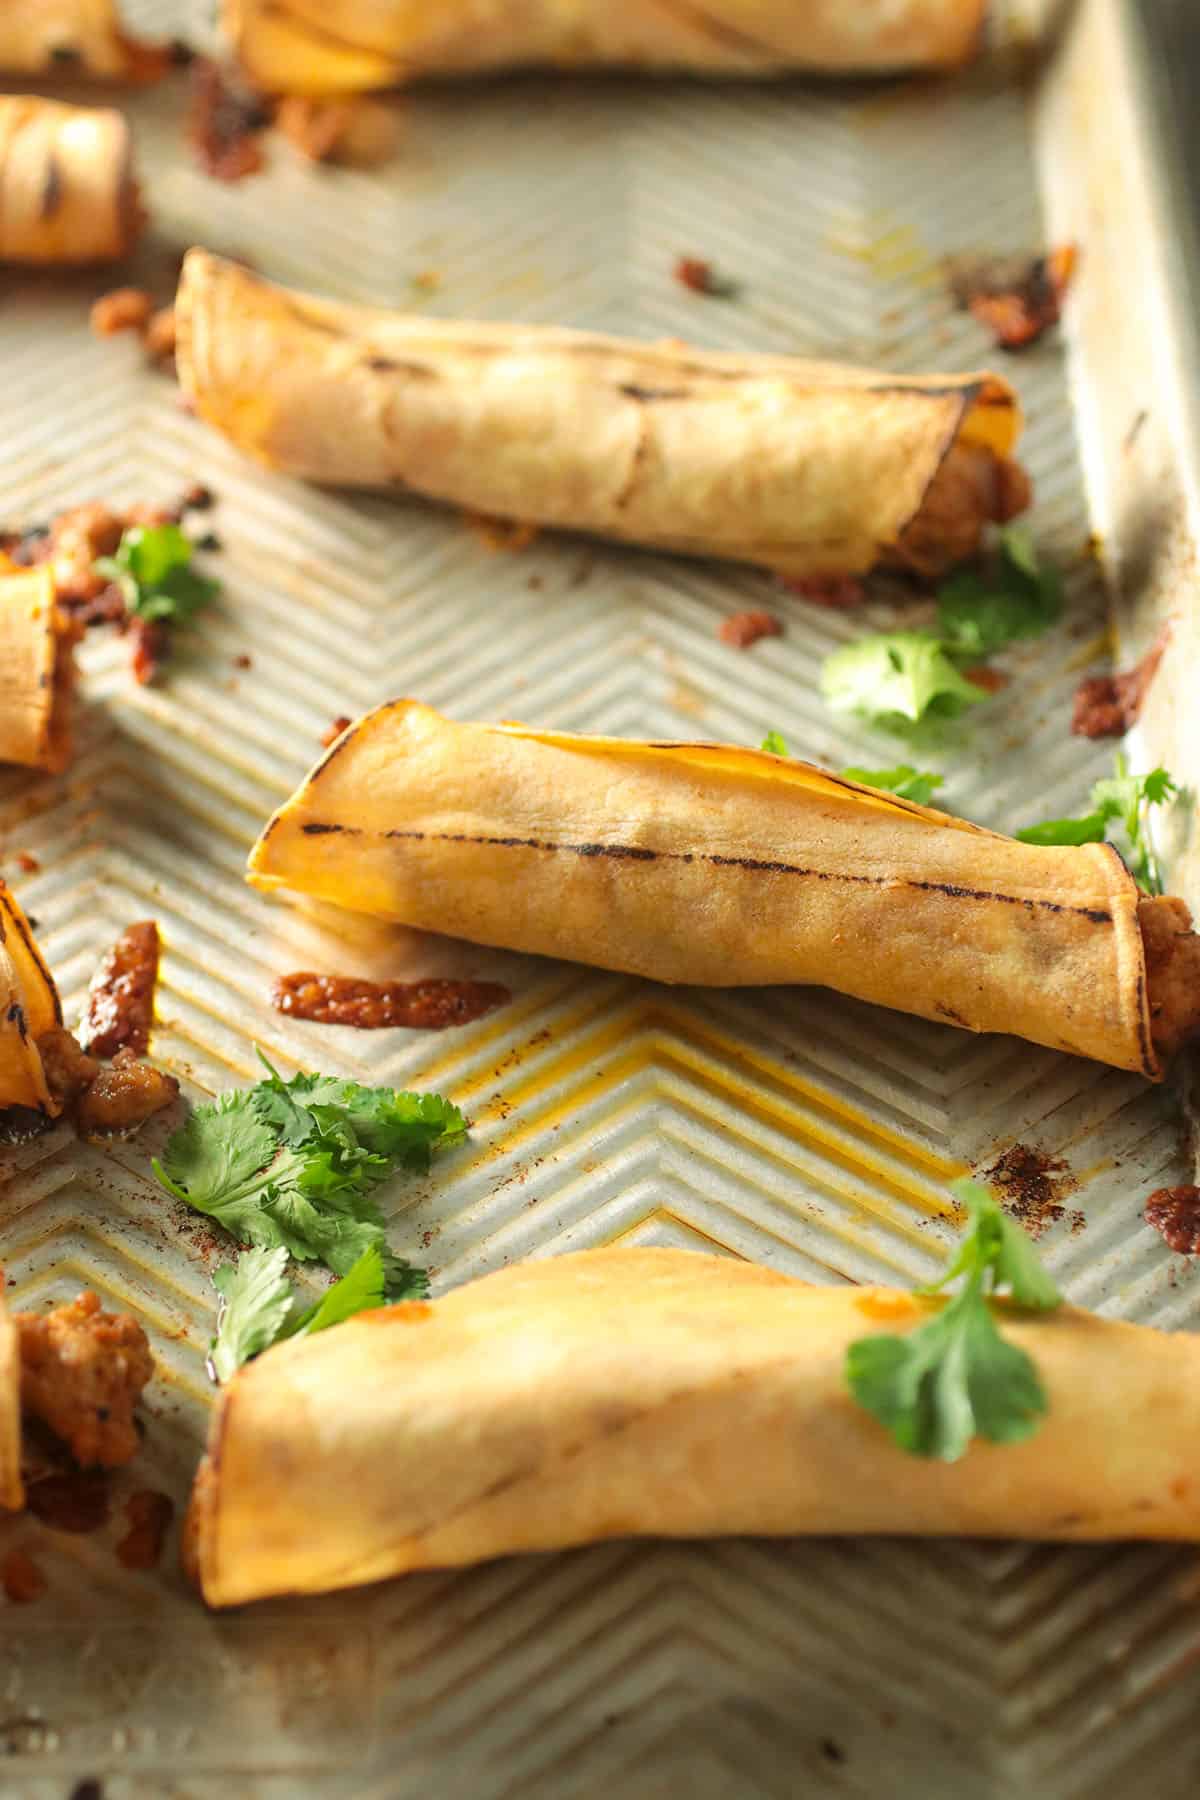 The freshly baked taquitos in the pan.